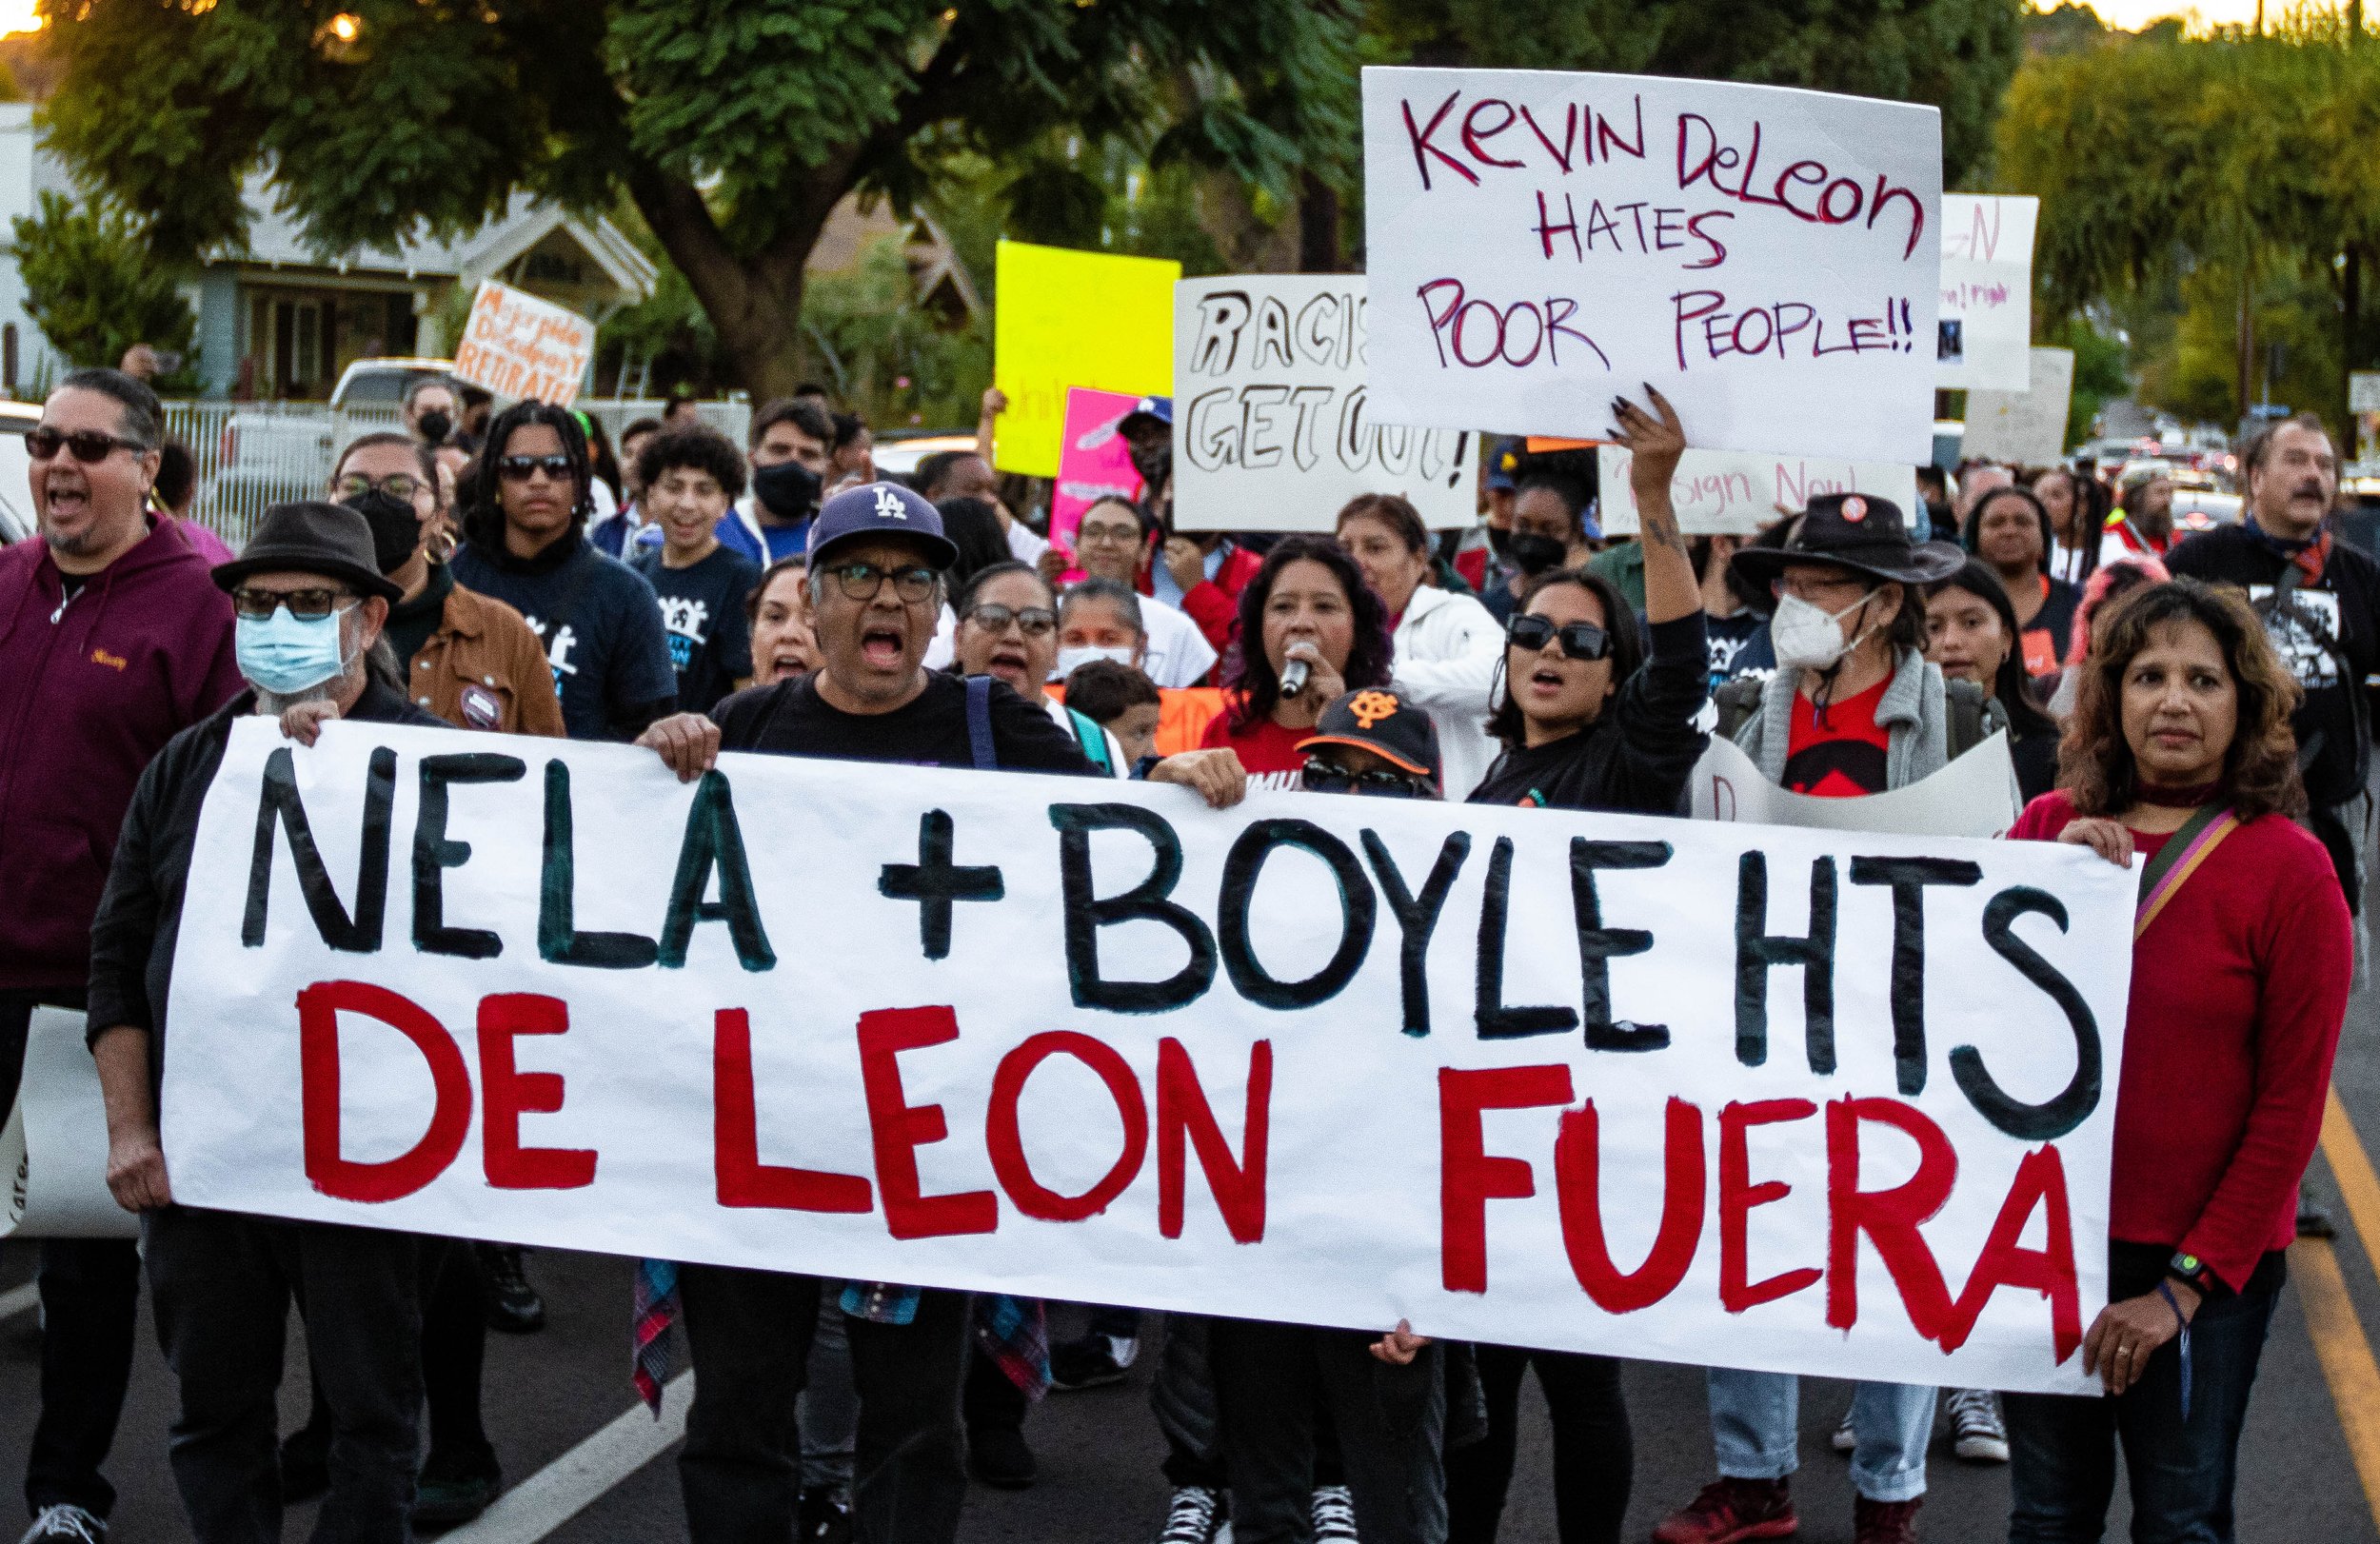  Protesters carry banners and march to Los Angeles Council Member Kevin De León's house in response to the leaked audio tapes in City Hall, after racist remarks from León and other LA council members were revealed. On Oct. 24, 2022, a rally of approx